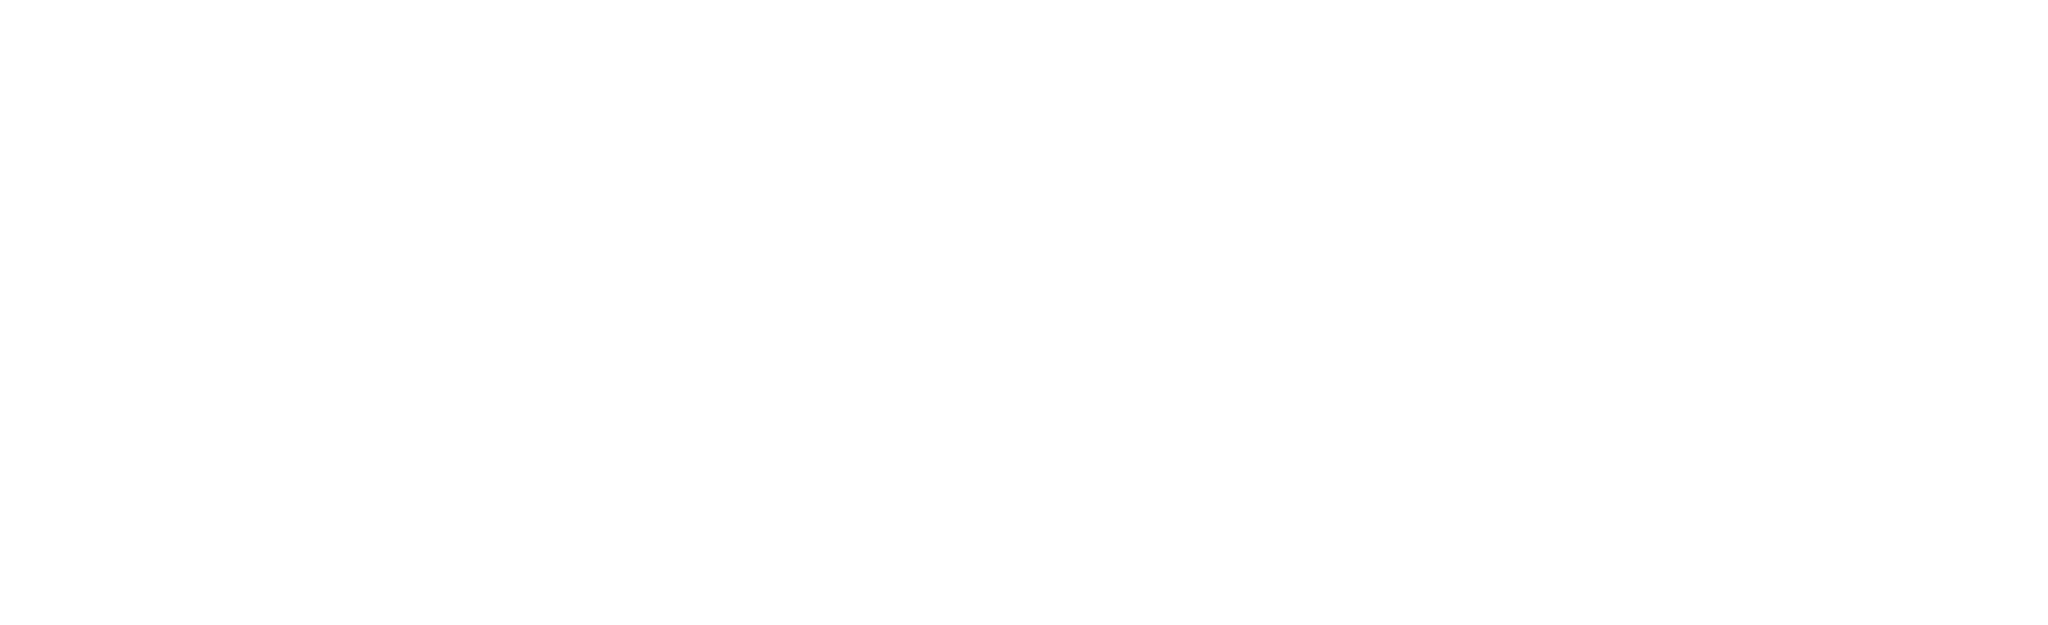 heroes journey band